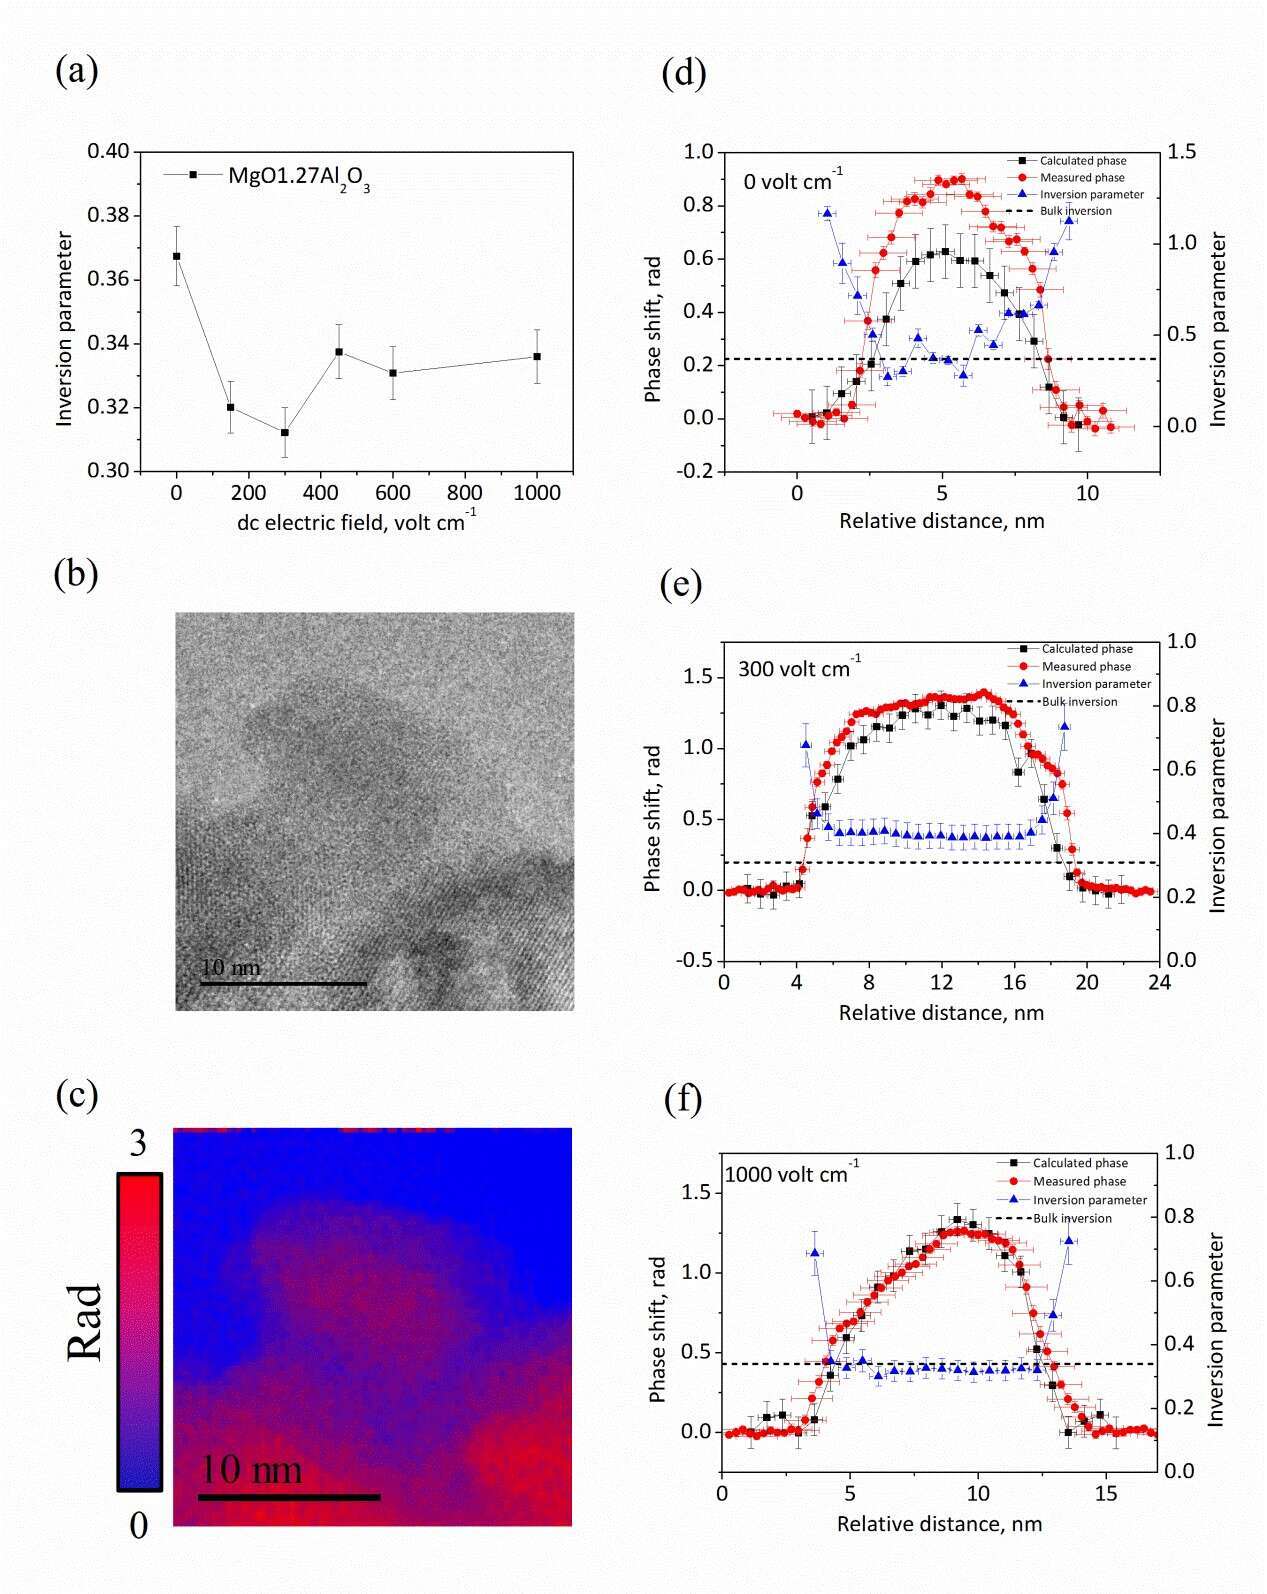 Figure 1. Inversion parameter of MgO•1.27Al2O3 subjected to dc-electric fields, up to 1000Vcm-1, and an annealing temperature of 870C (a), BF-TEM image (b) and phase-shift map of the electron wave as measured by EH (c) of as-synthesized MAS grains. Line profile values between grain surfaces of the inversion parameter (blue curves), measured phase-shift (red) and, phase-shift calculated from thickness contribution (black) after annealing at 870C without (d) and with applying an electric field: 300Vcm-1 (e) and 1000Vcm-1 (f)  